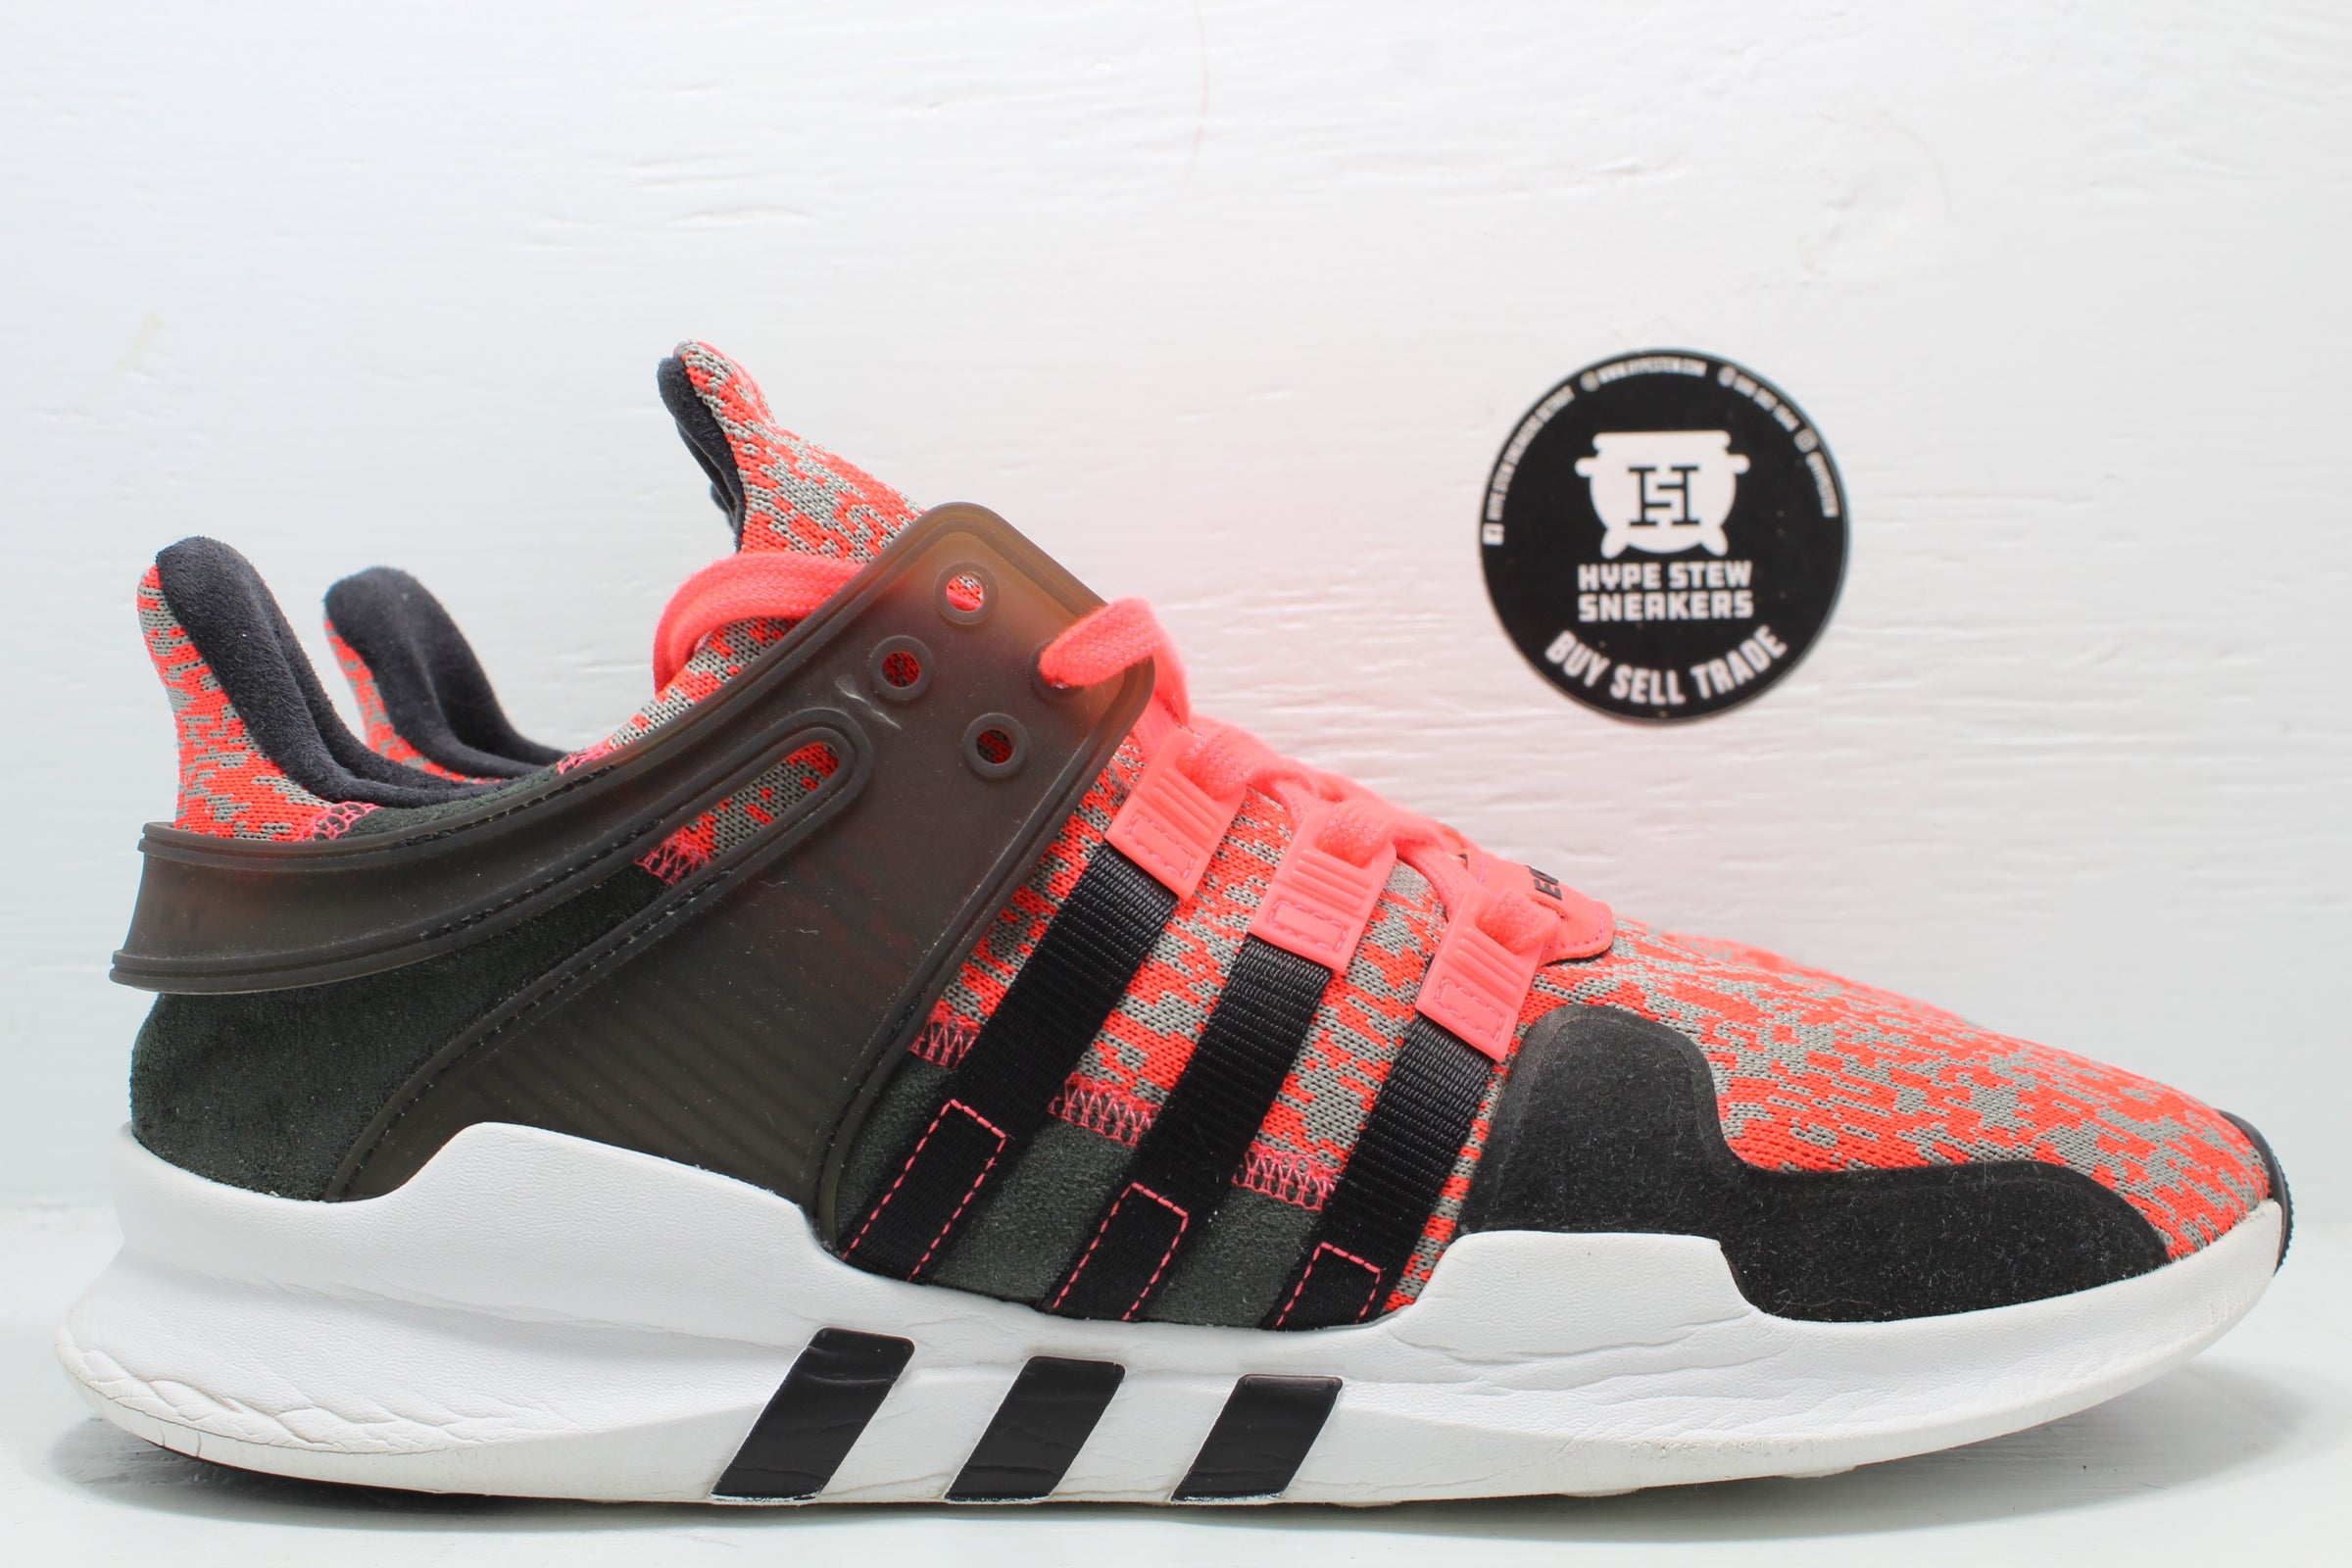 Adidas EQT Support Vapor Pink | Hype Sneakers Detroit